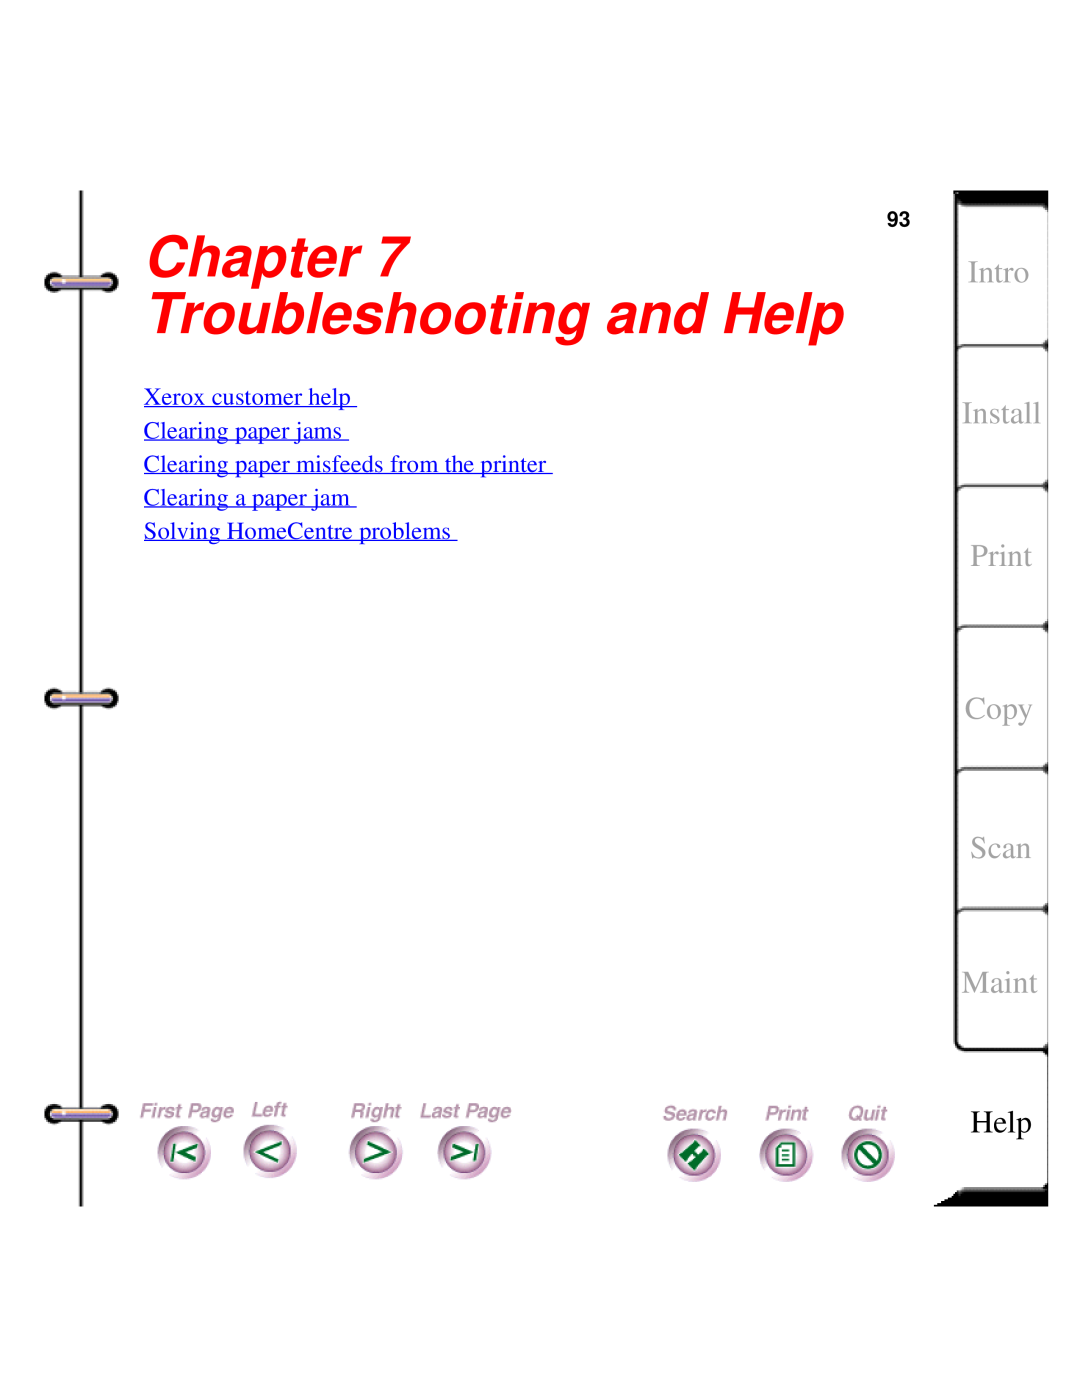 Xerox Document HomeCentre manual Troubleshooting and Help, Intro Install Print, Copy Scan Maint 